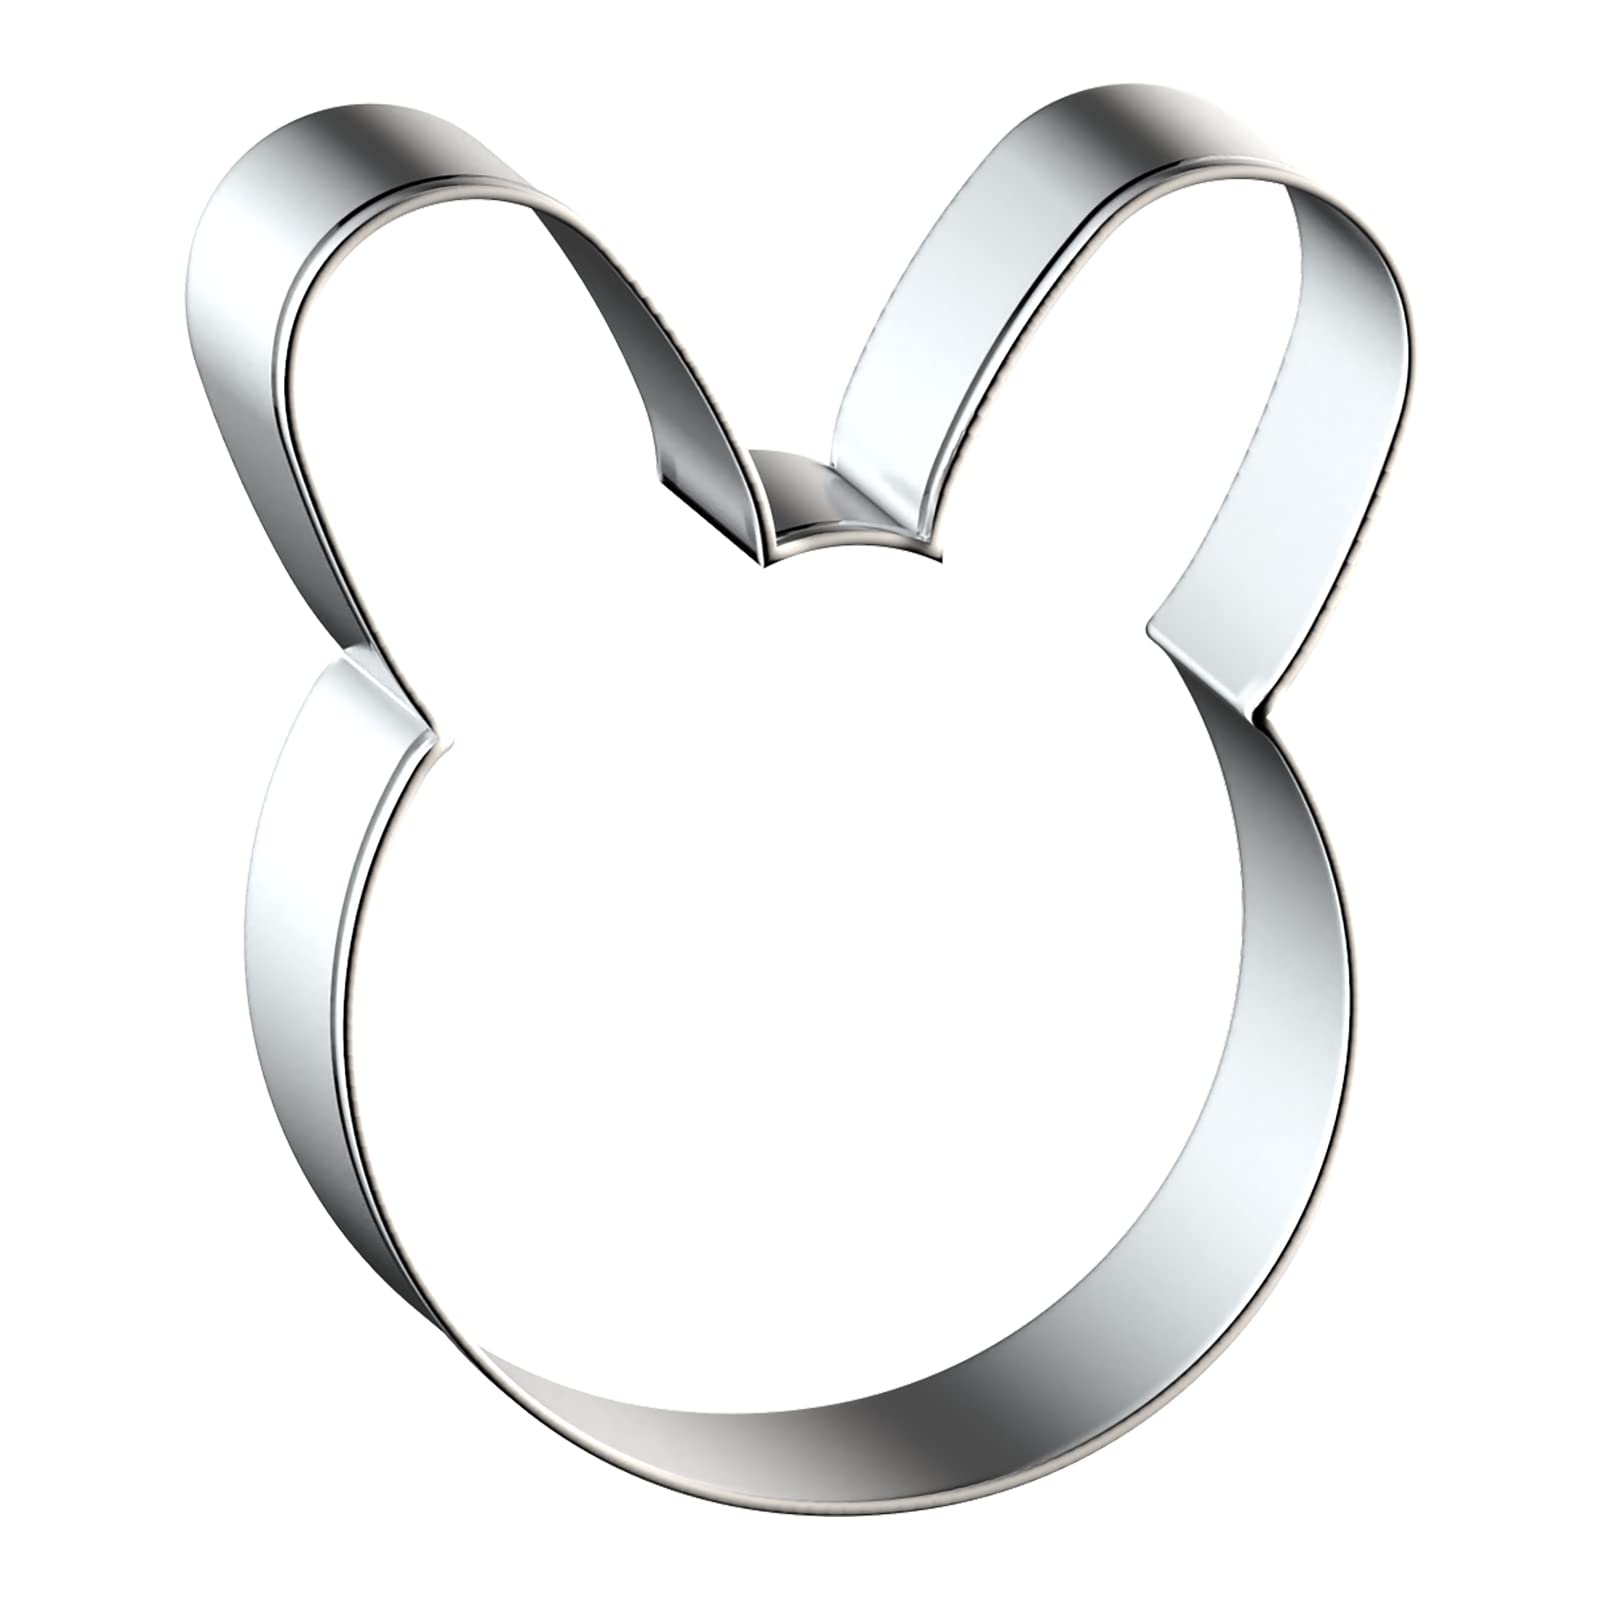 Bunny Cookie Cutter Set Large - 5", 4", 3", 2" - 4 Piece Easter Bunny Rabbit Hare Head Face Shaped Cookie Cutters - Stainless Steel